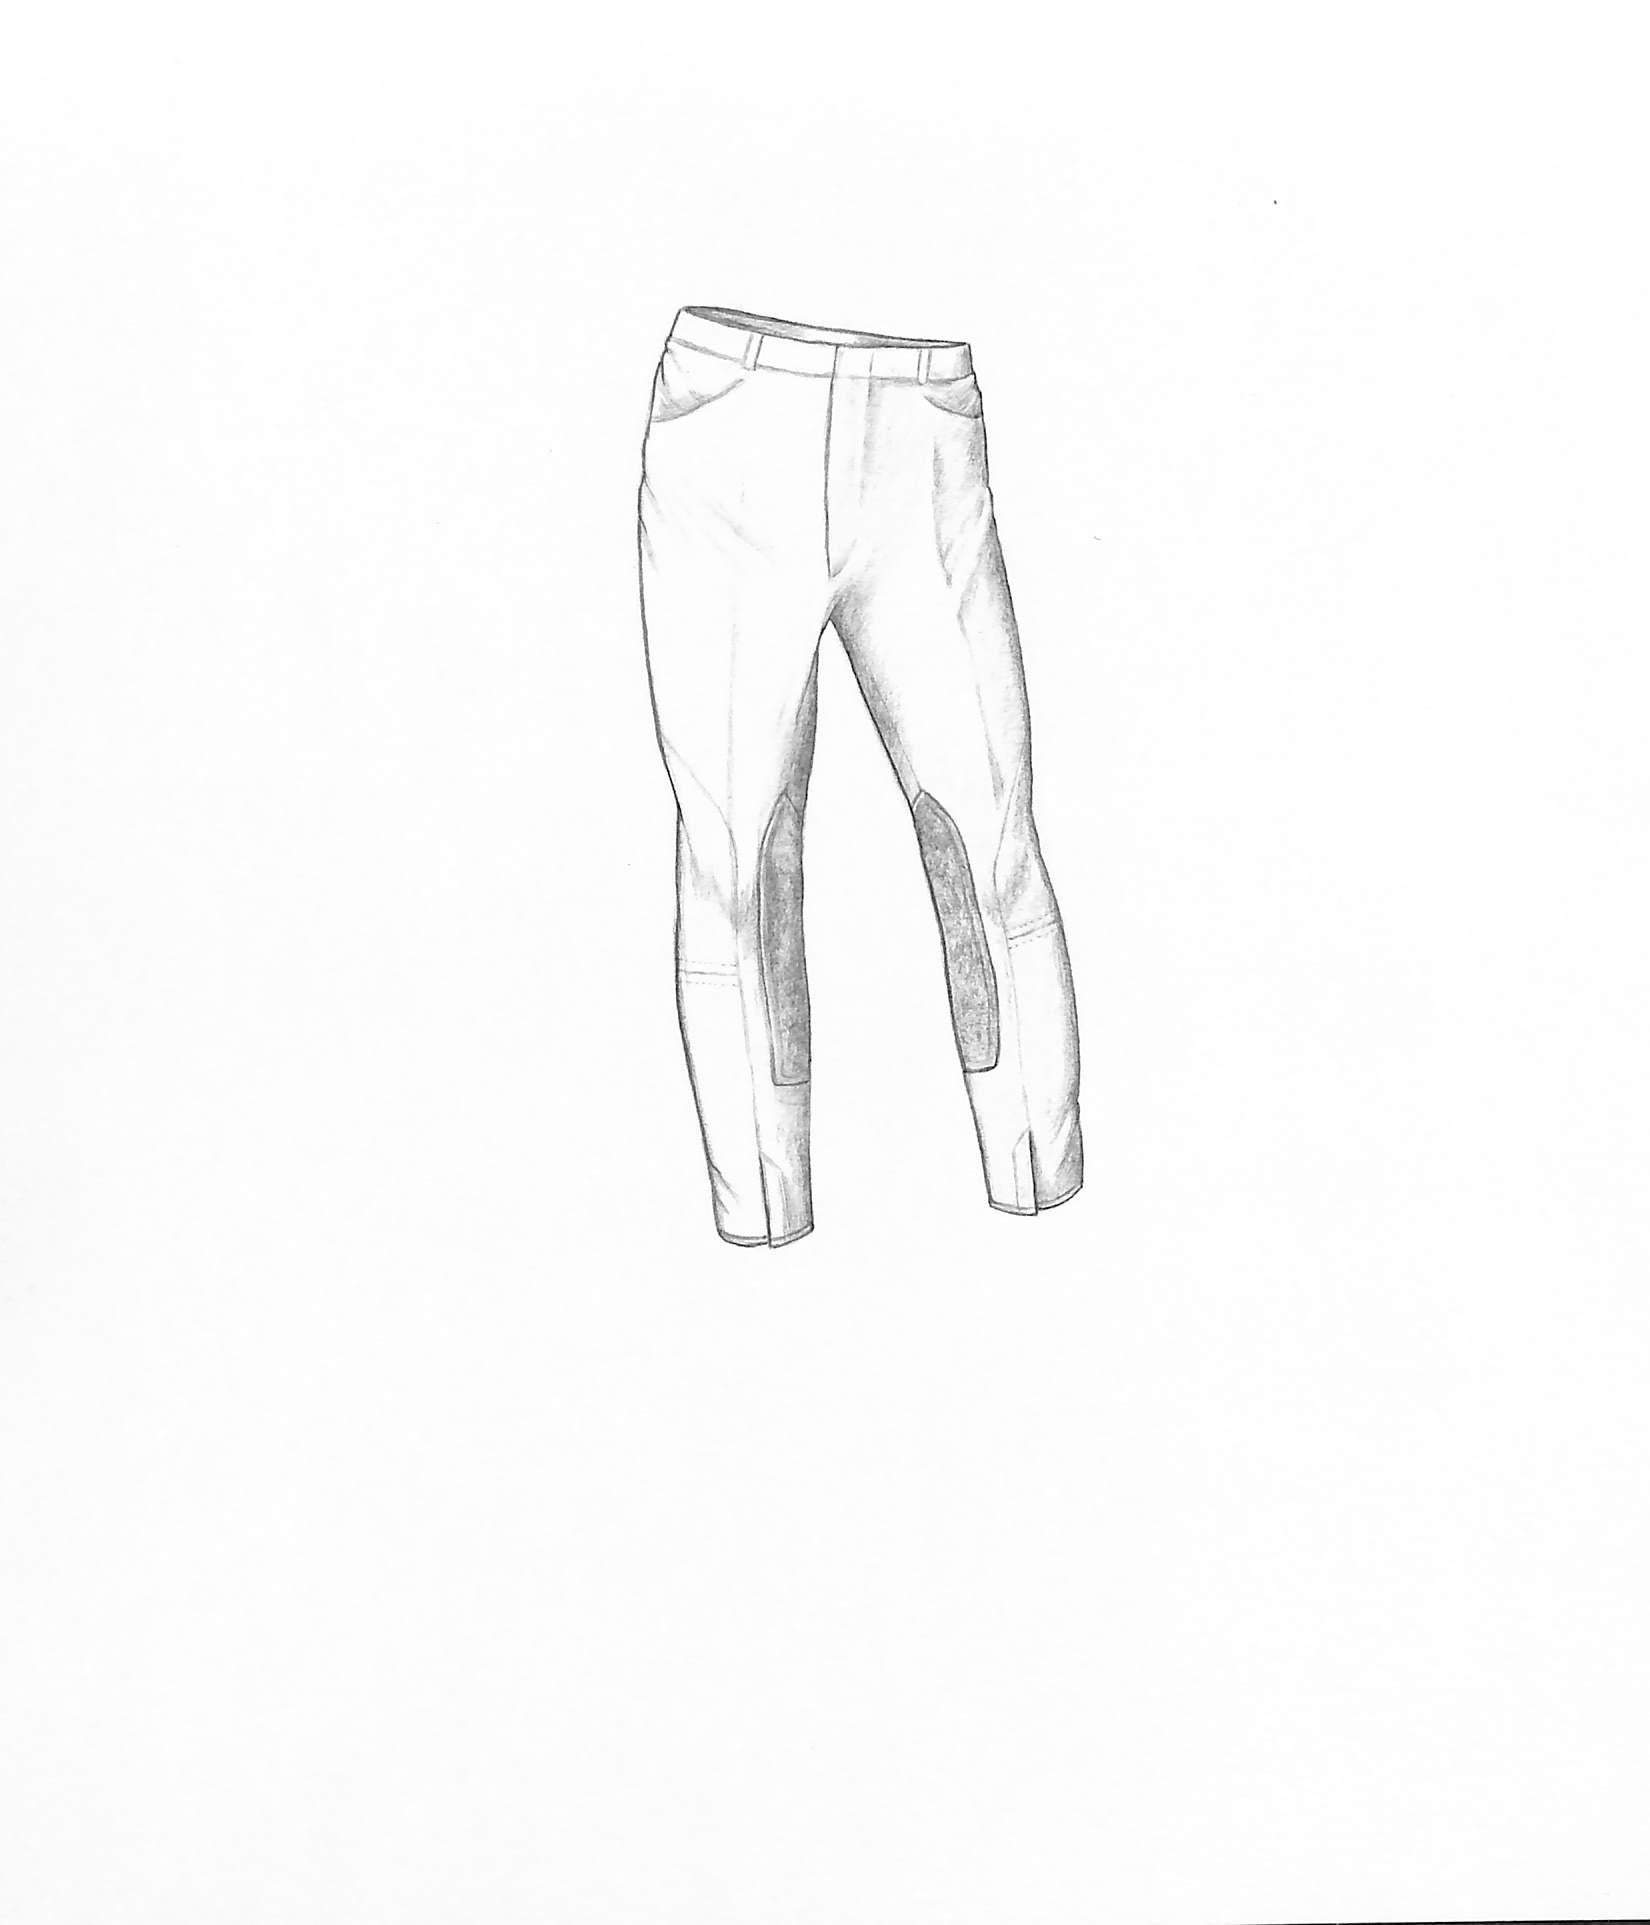 Tailored Sportsman's Britches Graphite Drawing - Art by Unknown